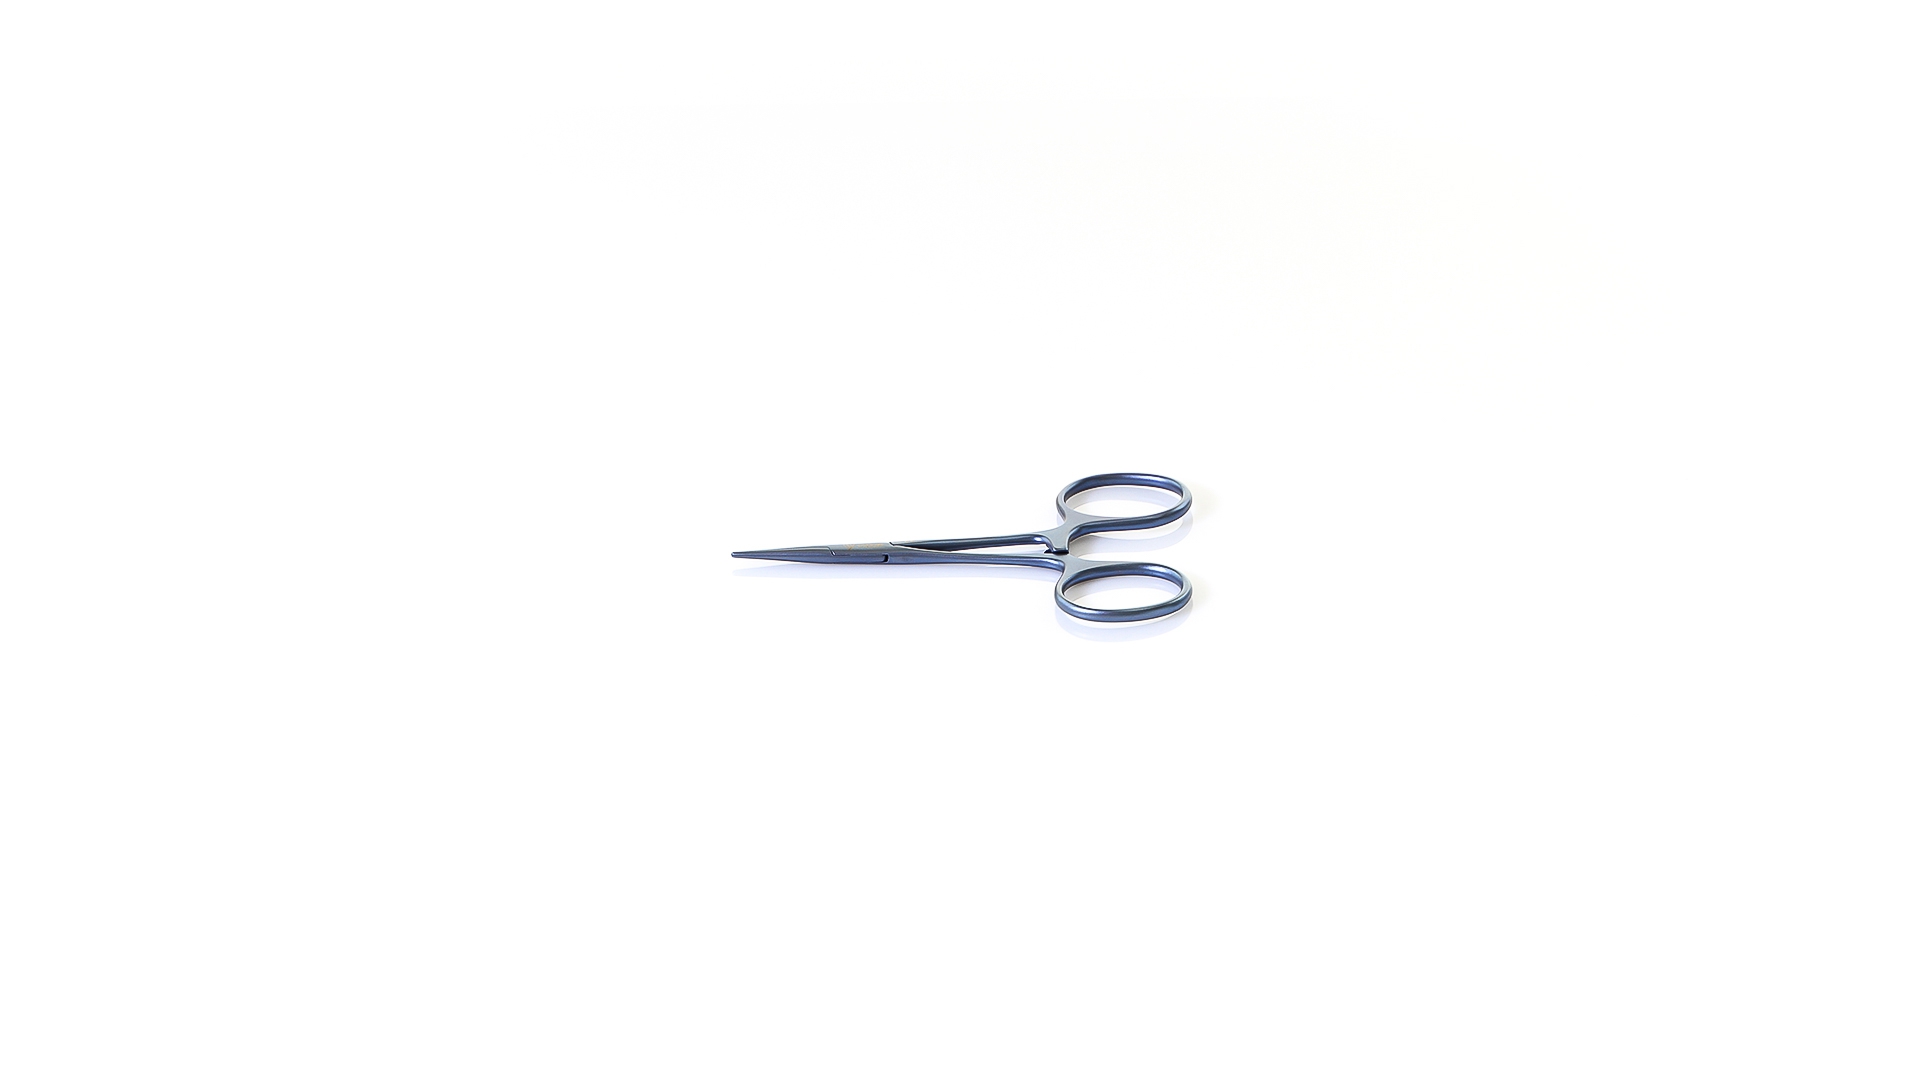 Hartman Mosquito Forceps - Straight smooth jaws